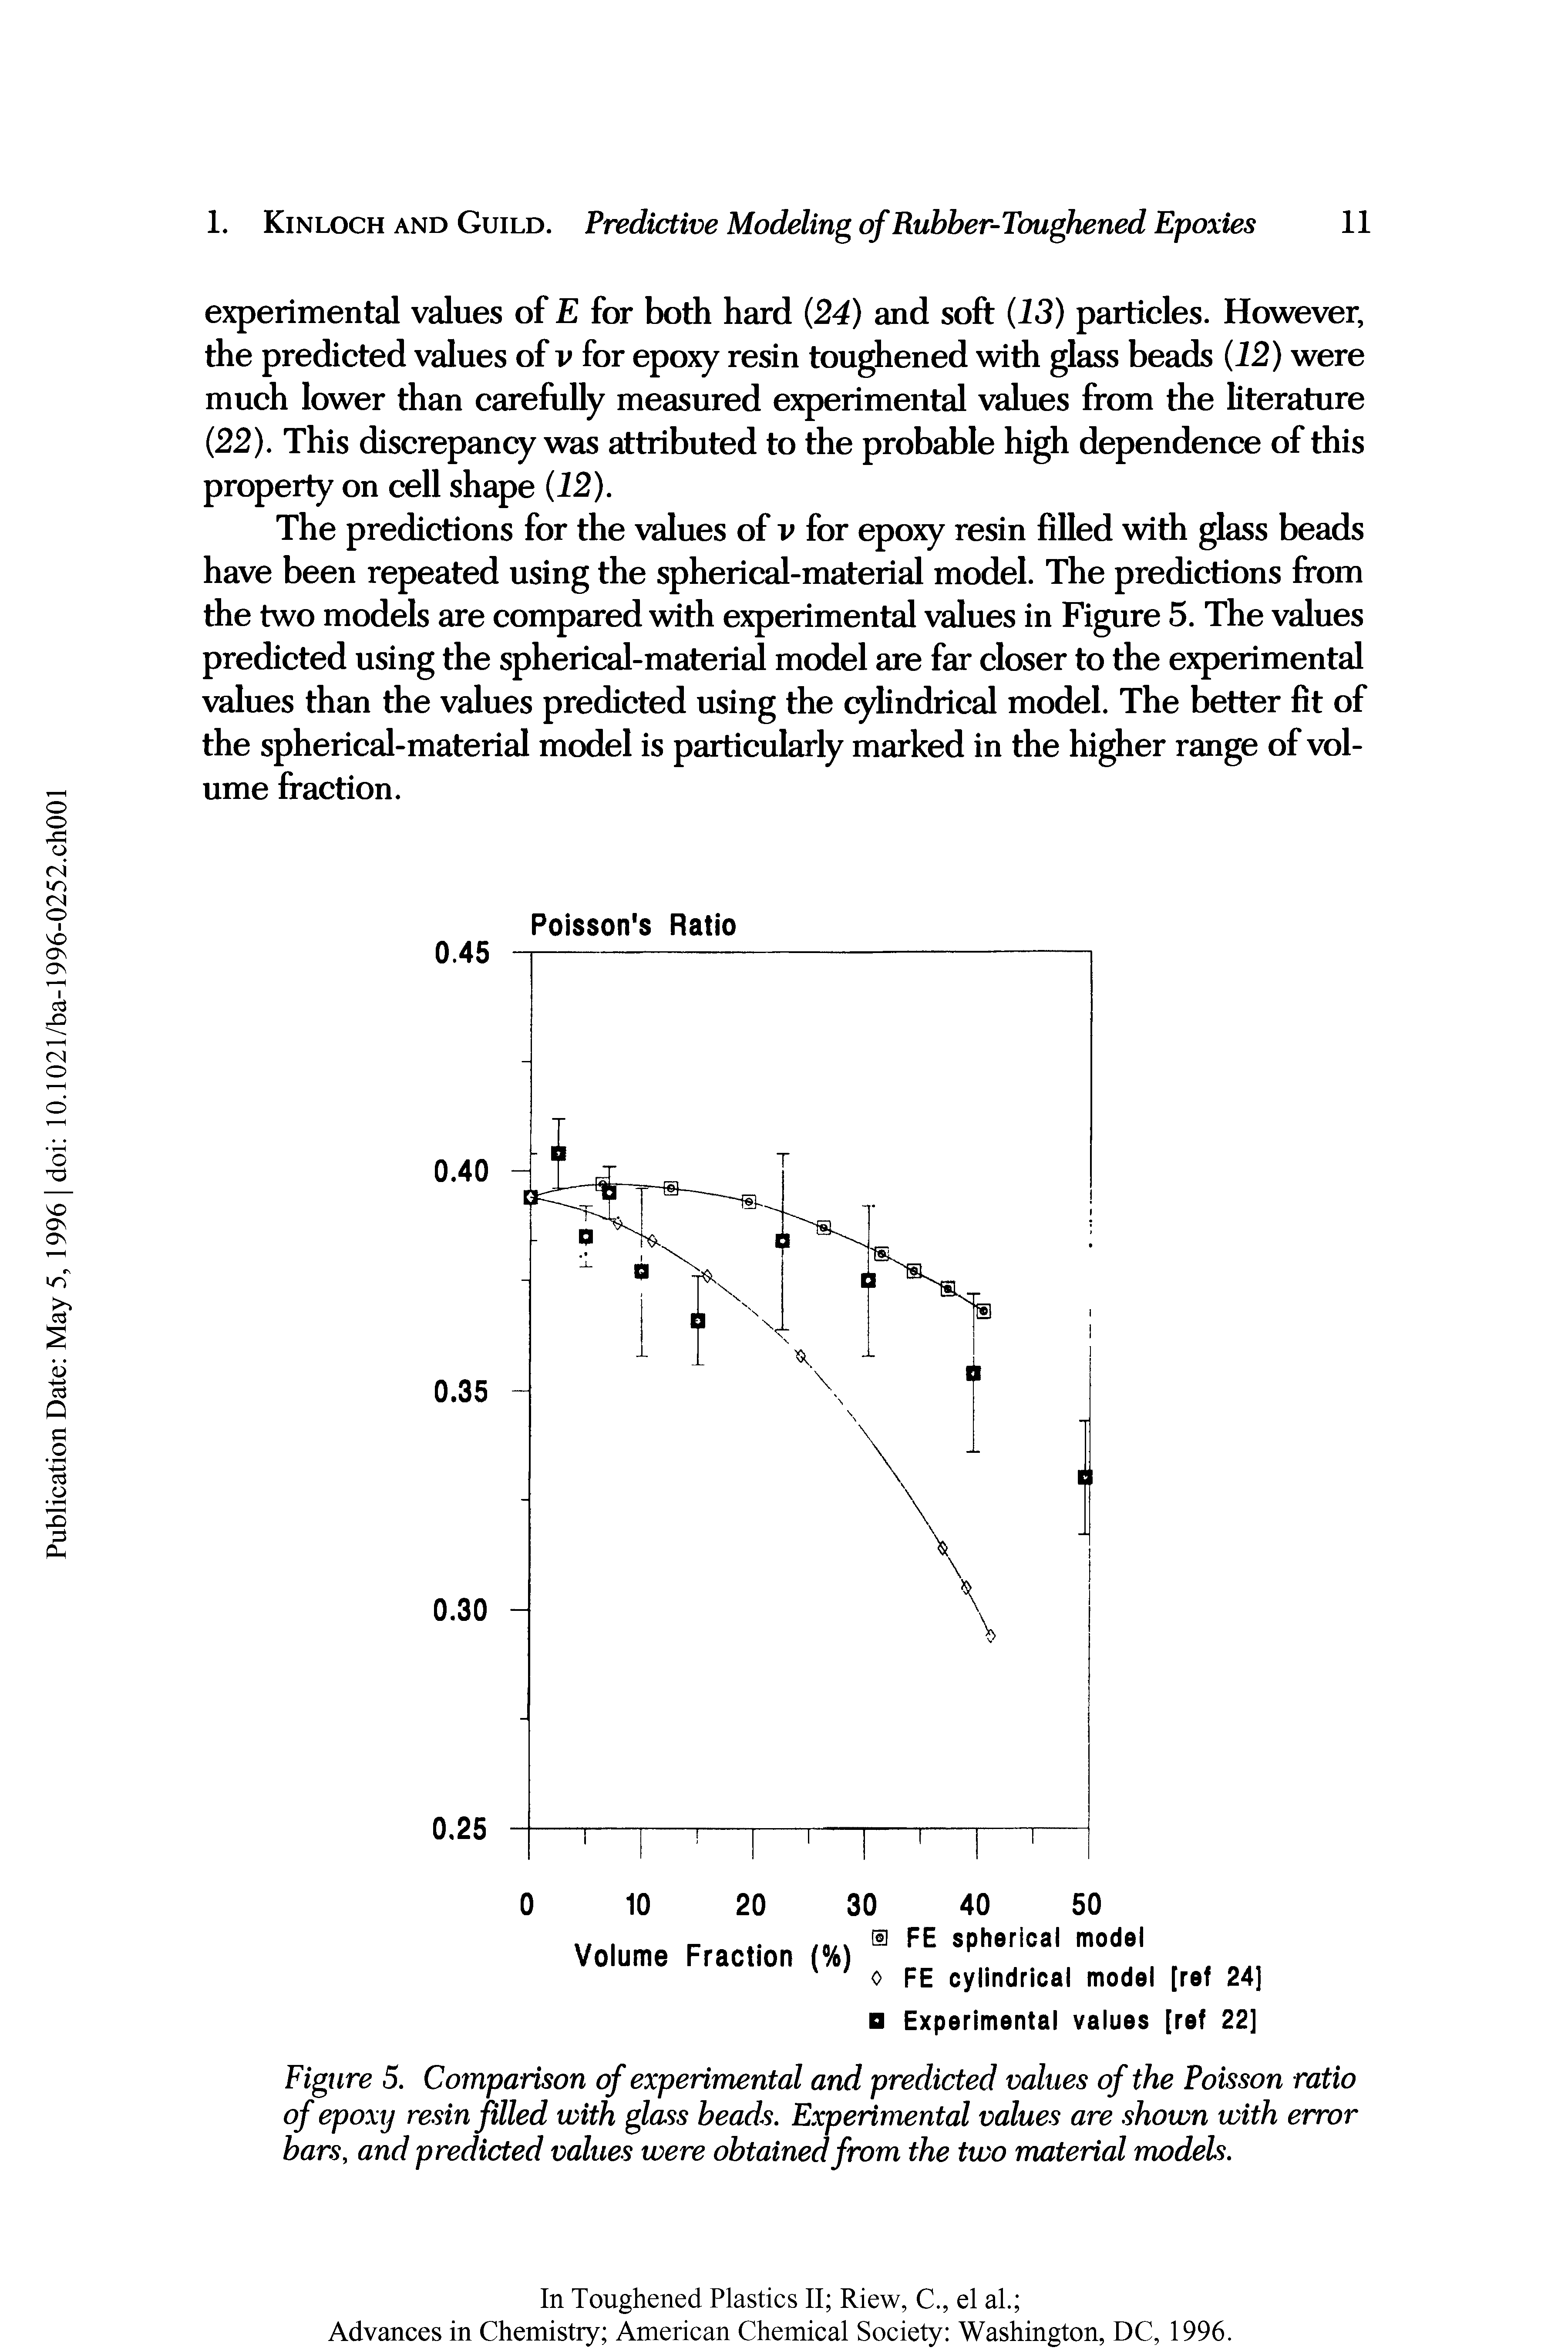 Figure 5. Comparison of experimental and predicted values of the Poisson ratio of epoxy resin filled with glass beads. Experimental values are shown with error bars, and predicted values were obtained from the two material models.